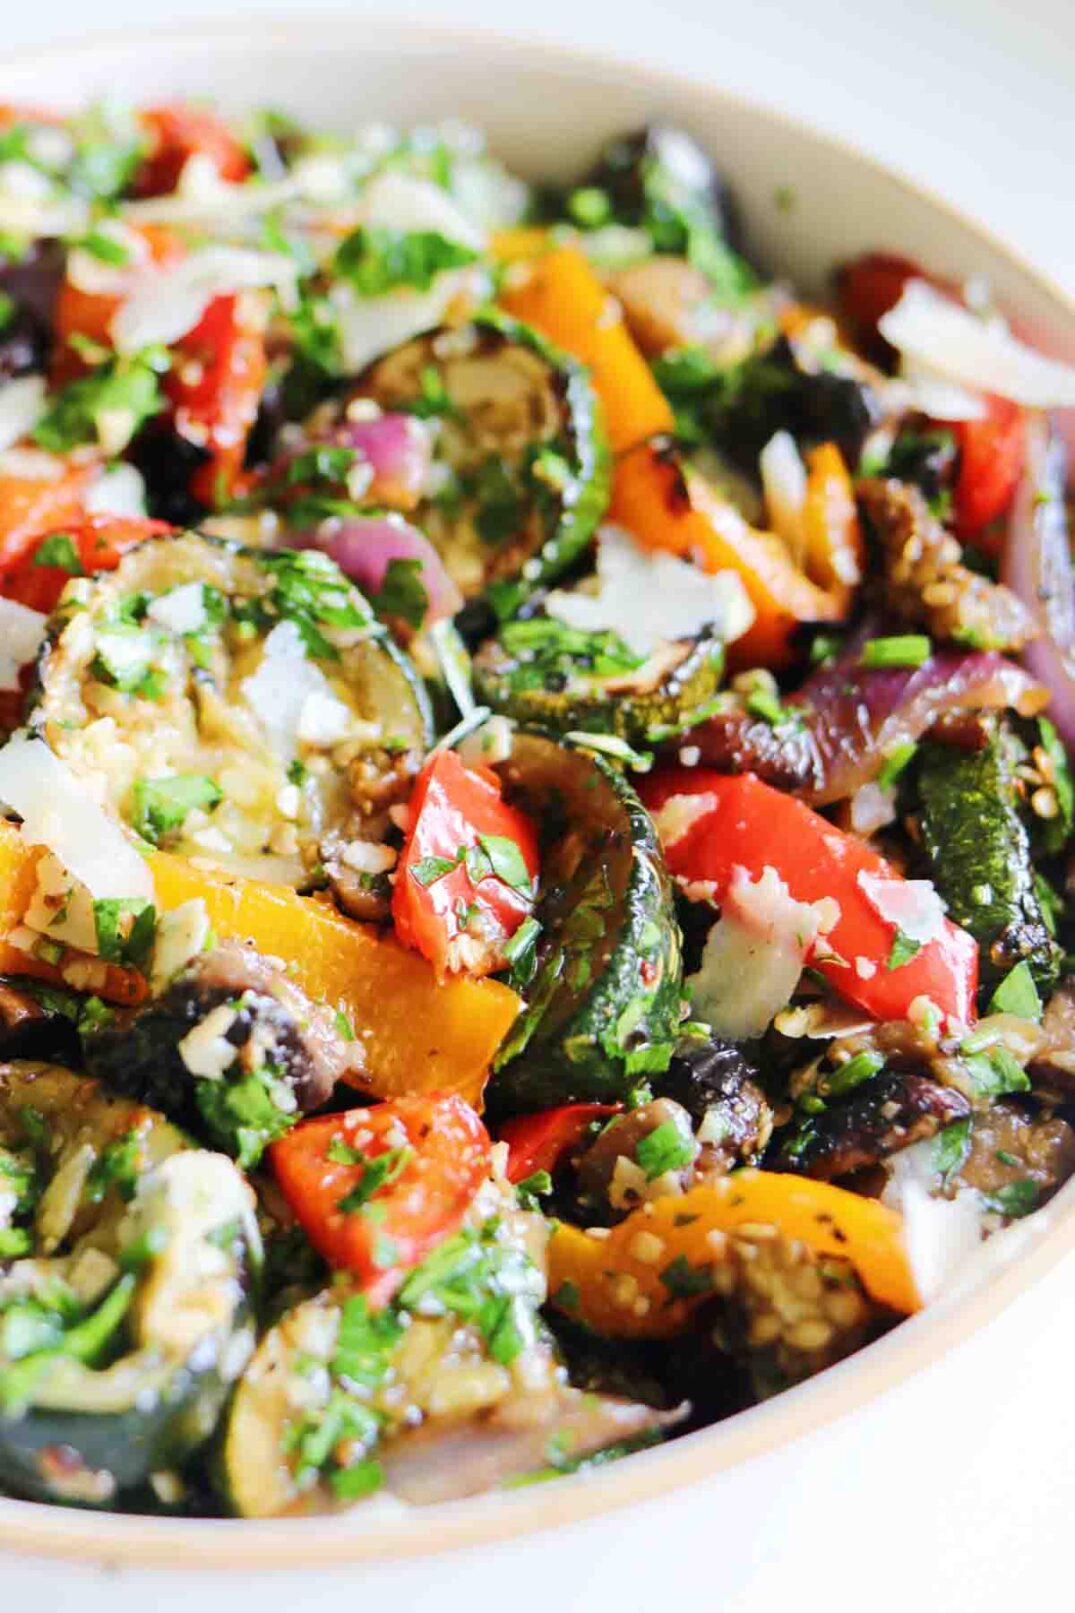 a white bowl filled with colorful veggies tossed in green herb sauce.